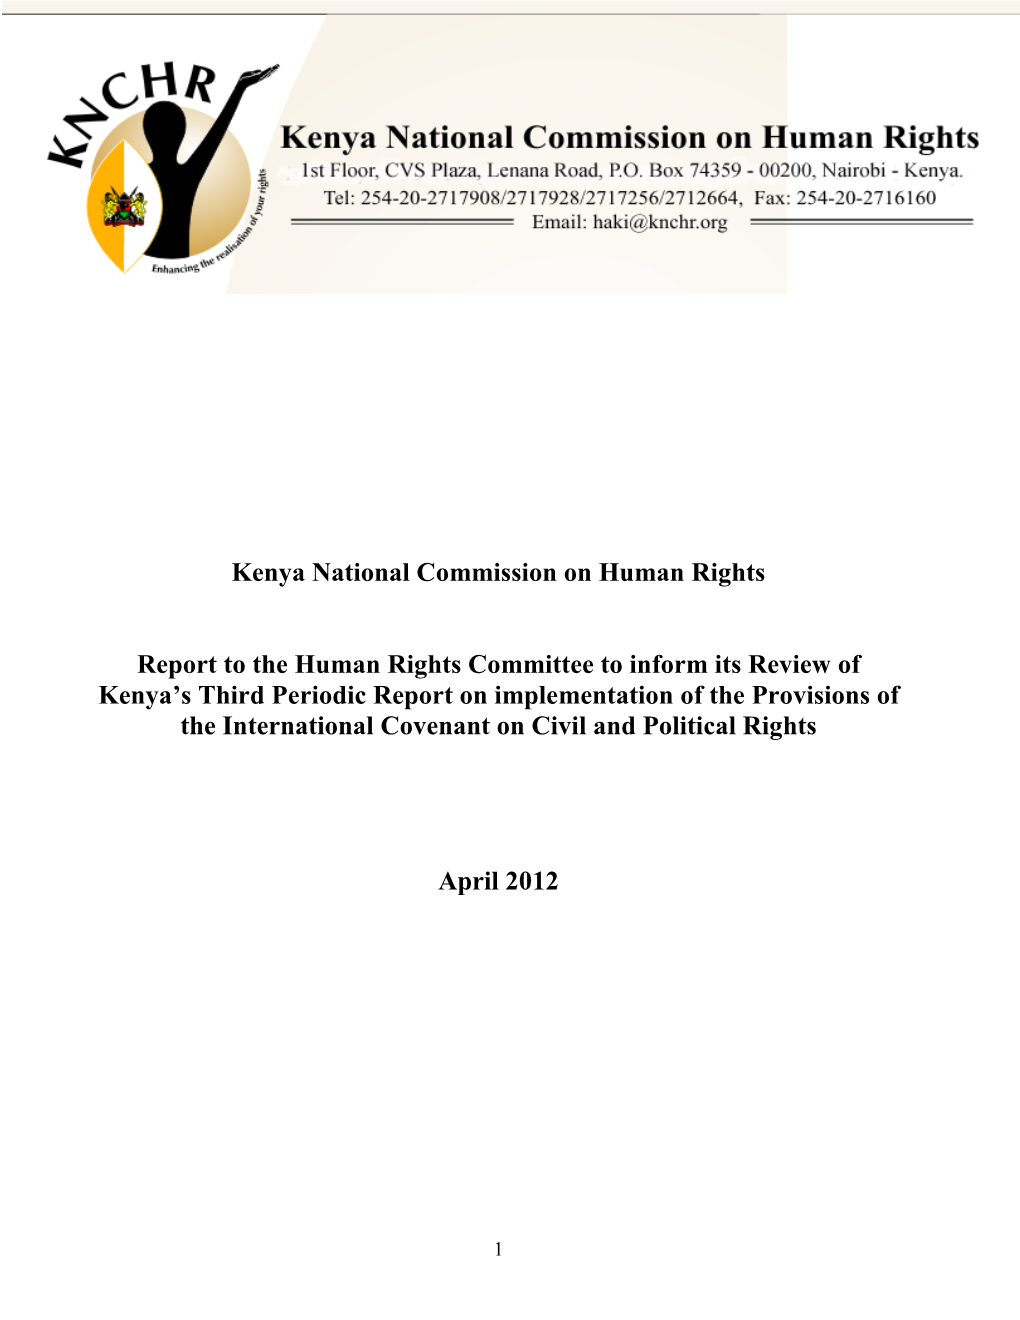 7Th Report of the Government of Kenya on Implemention of the Convention on the Elimination of All Forms of Discrimination Agai